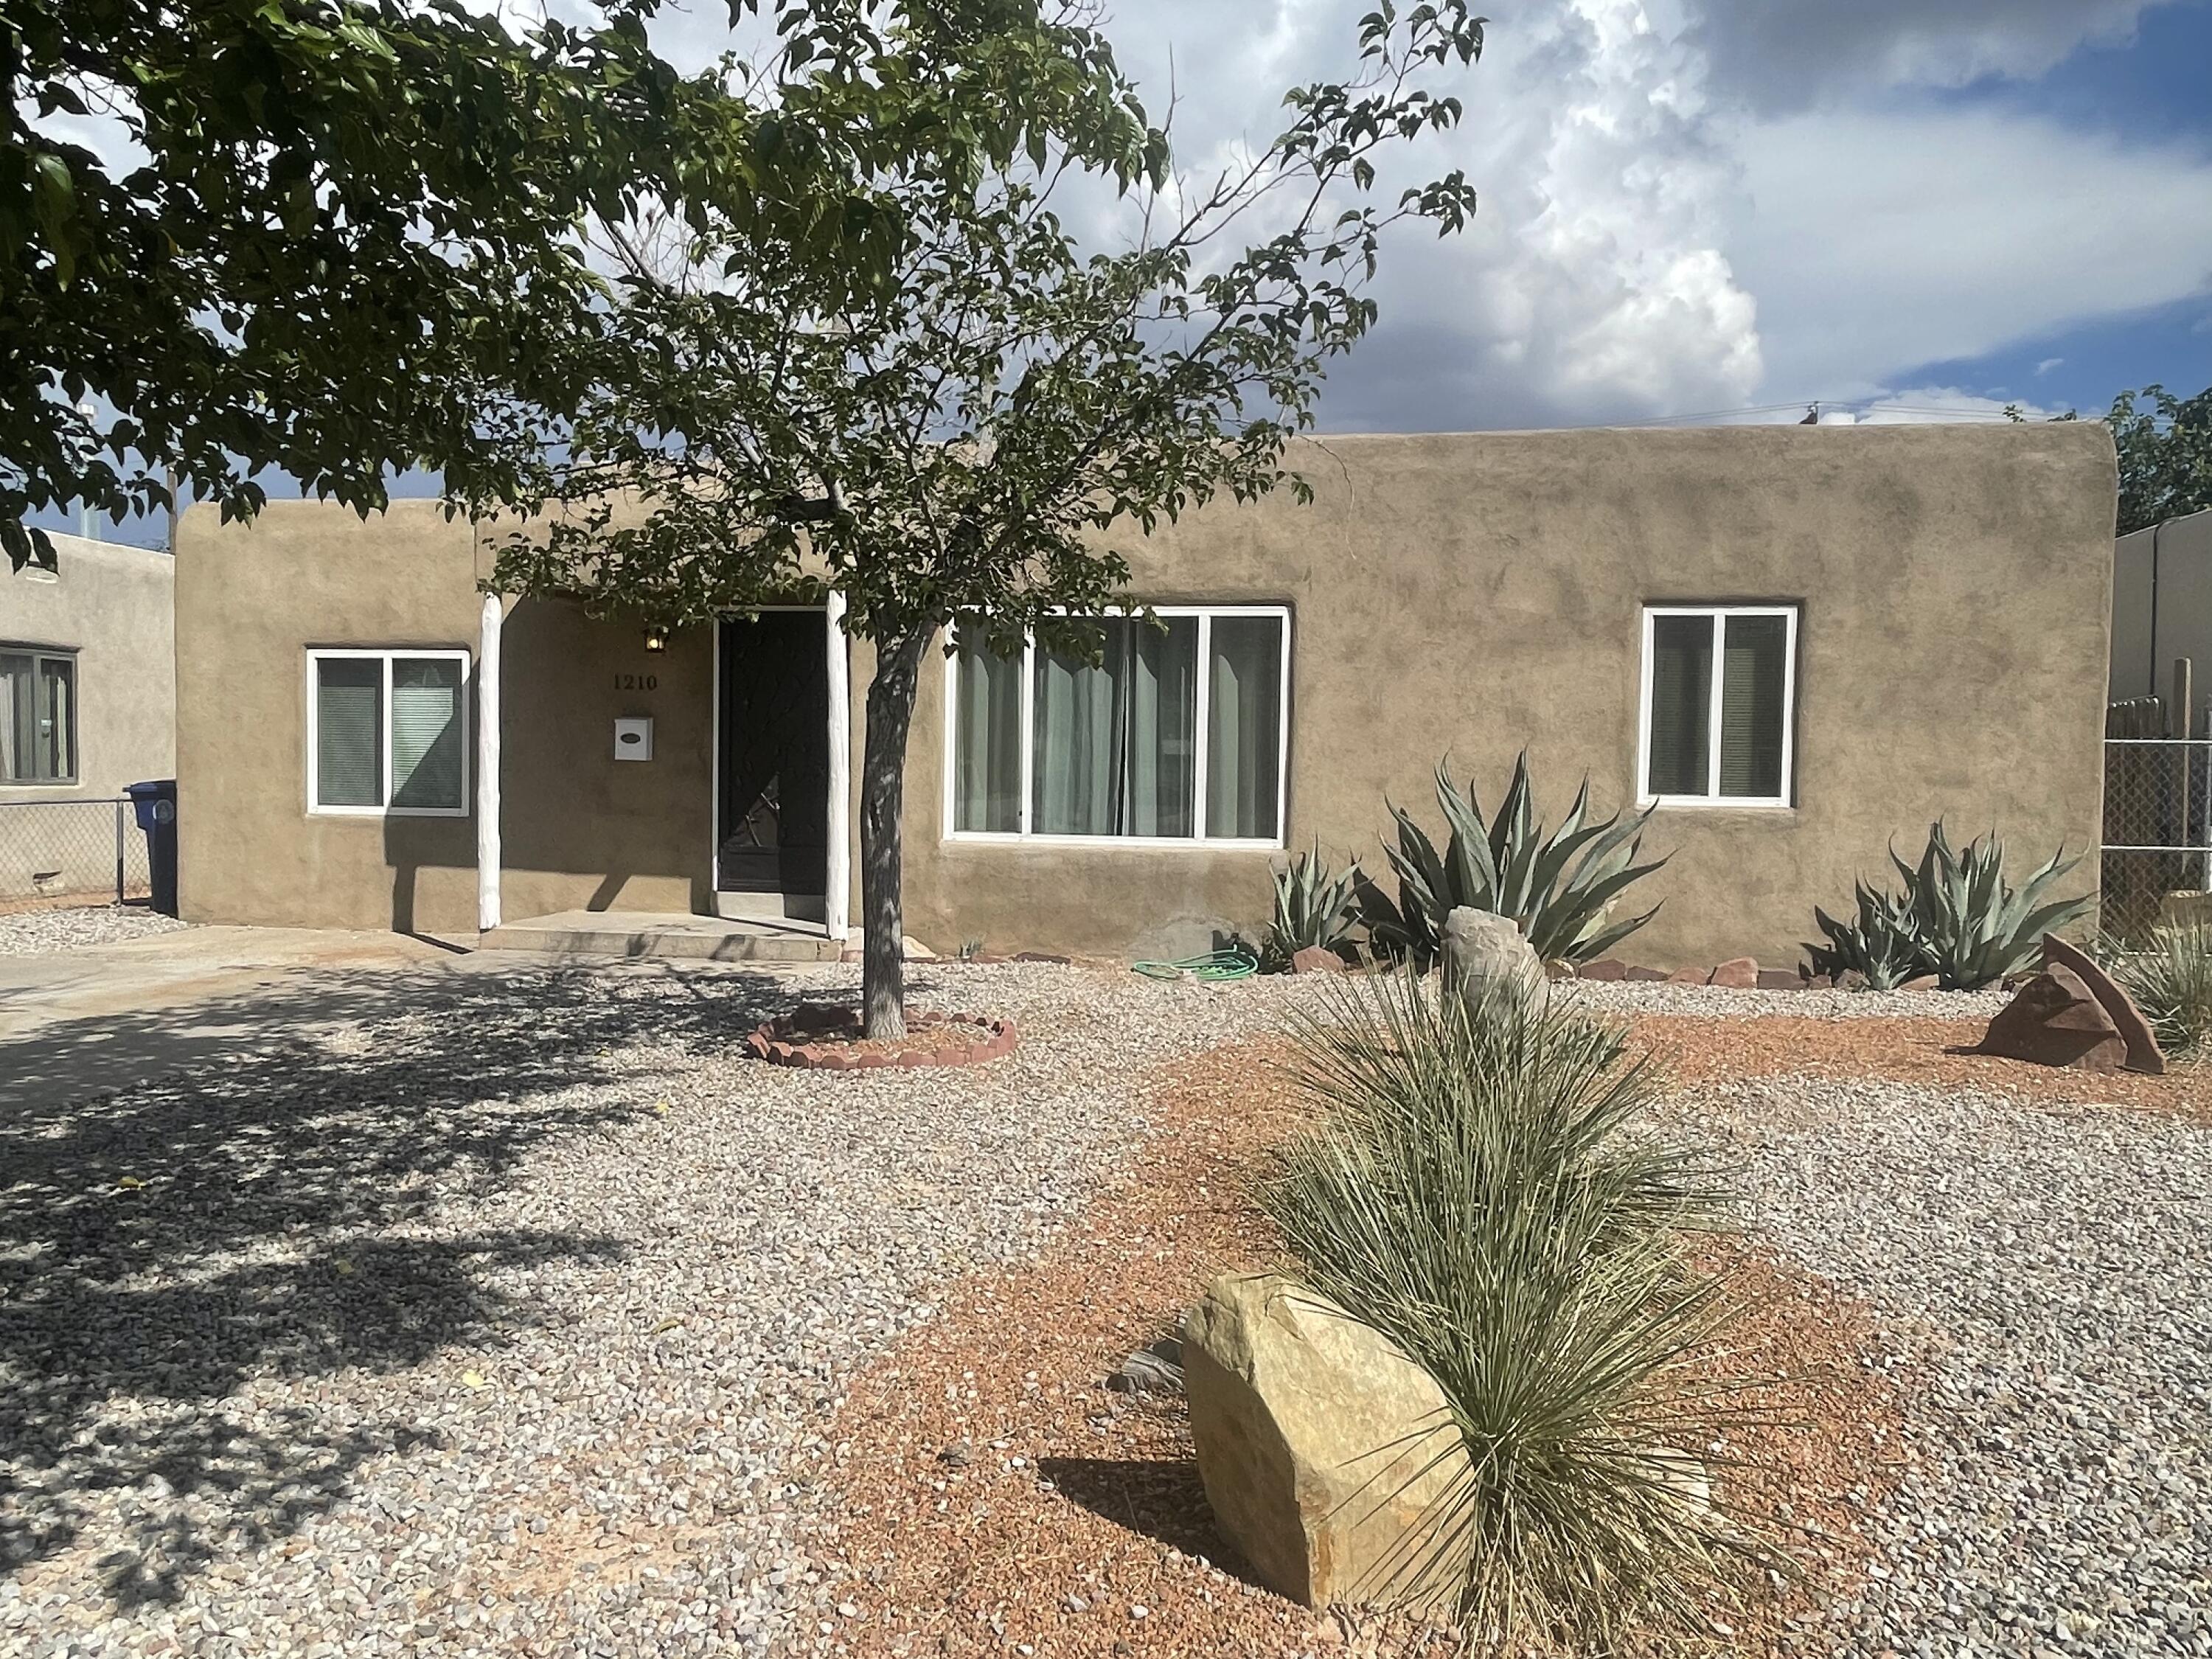 Charming Ridgecrest beauty close to elementary school, parks, shopping. Nicely cared for home with large back yard, covered patio, storage shed, separate laundry room, Large living room with beautiful hard wood flooring, tile in wet areas. Perfect home ready for you.